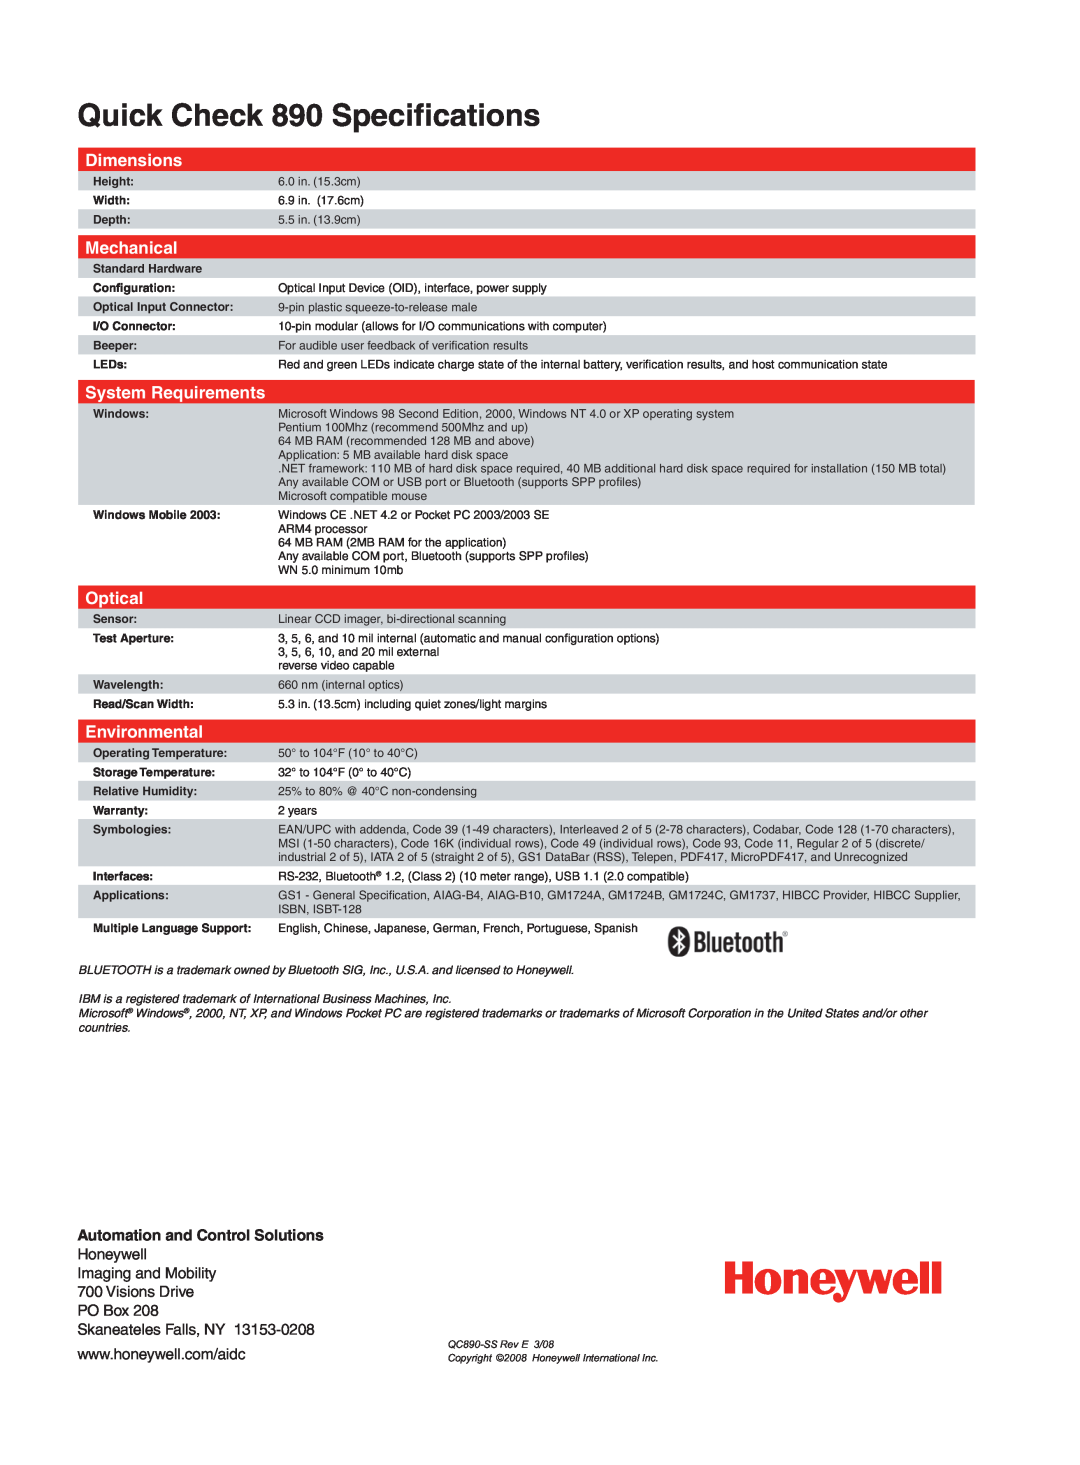 Honeywell Automation and Control Solutions, Quick Check 890 Speciﬁcations, Dimensions, Mechanical, System Requirements 